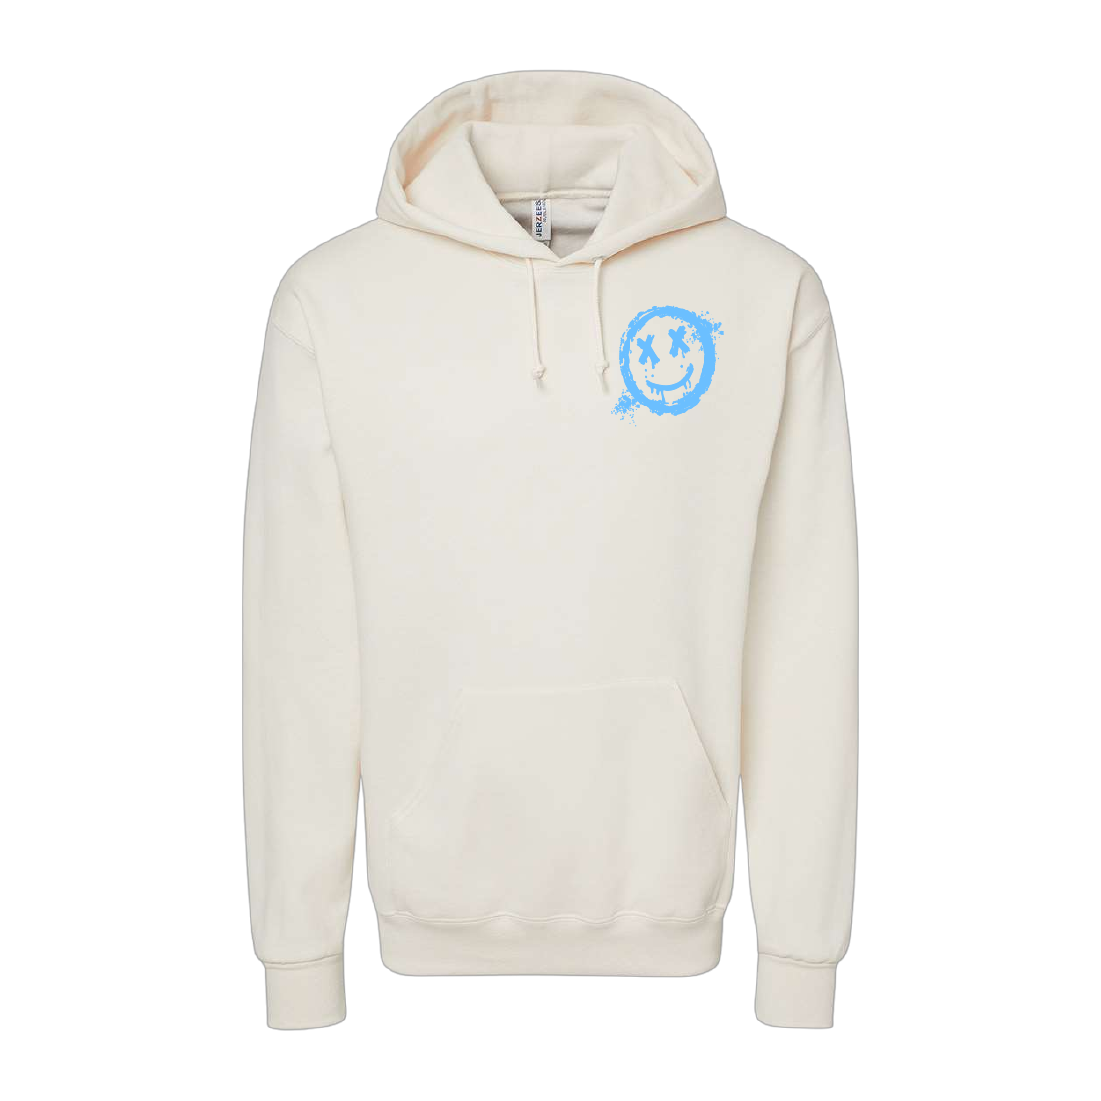 Never Give Up (Standard Hoodie)